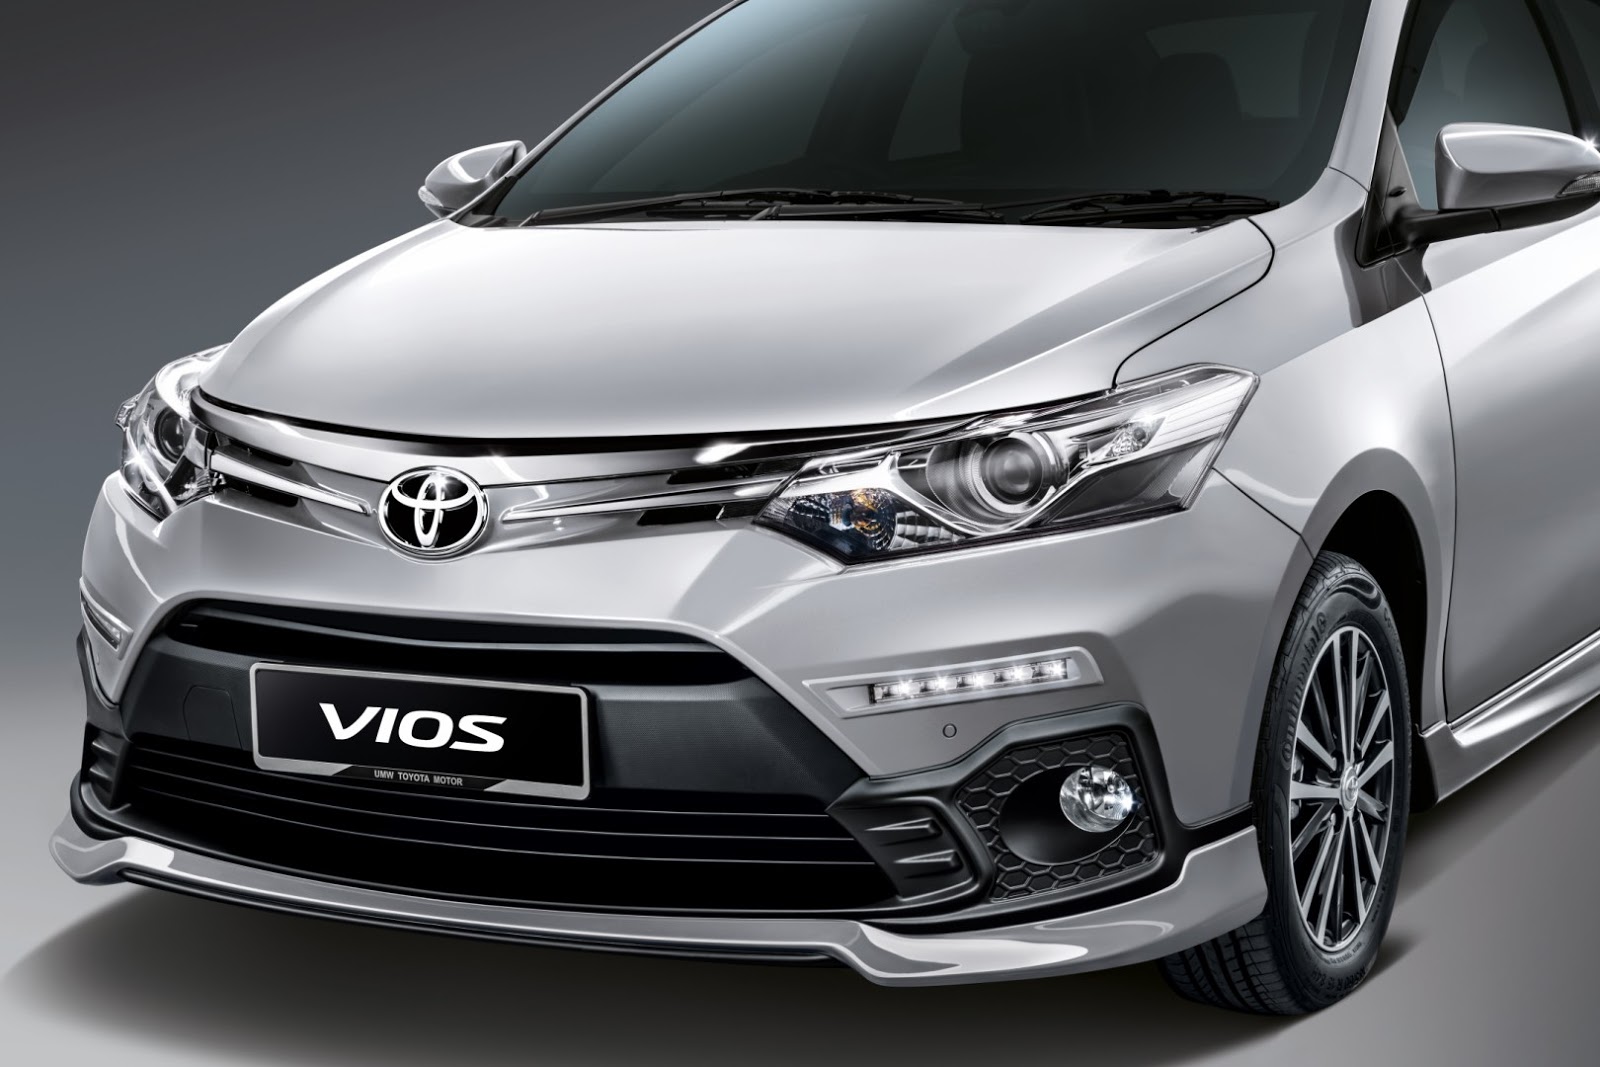 Motoring-Malaysia: The 2018 Toyota Vios Gets Some Upgrades ...